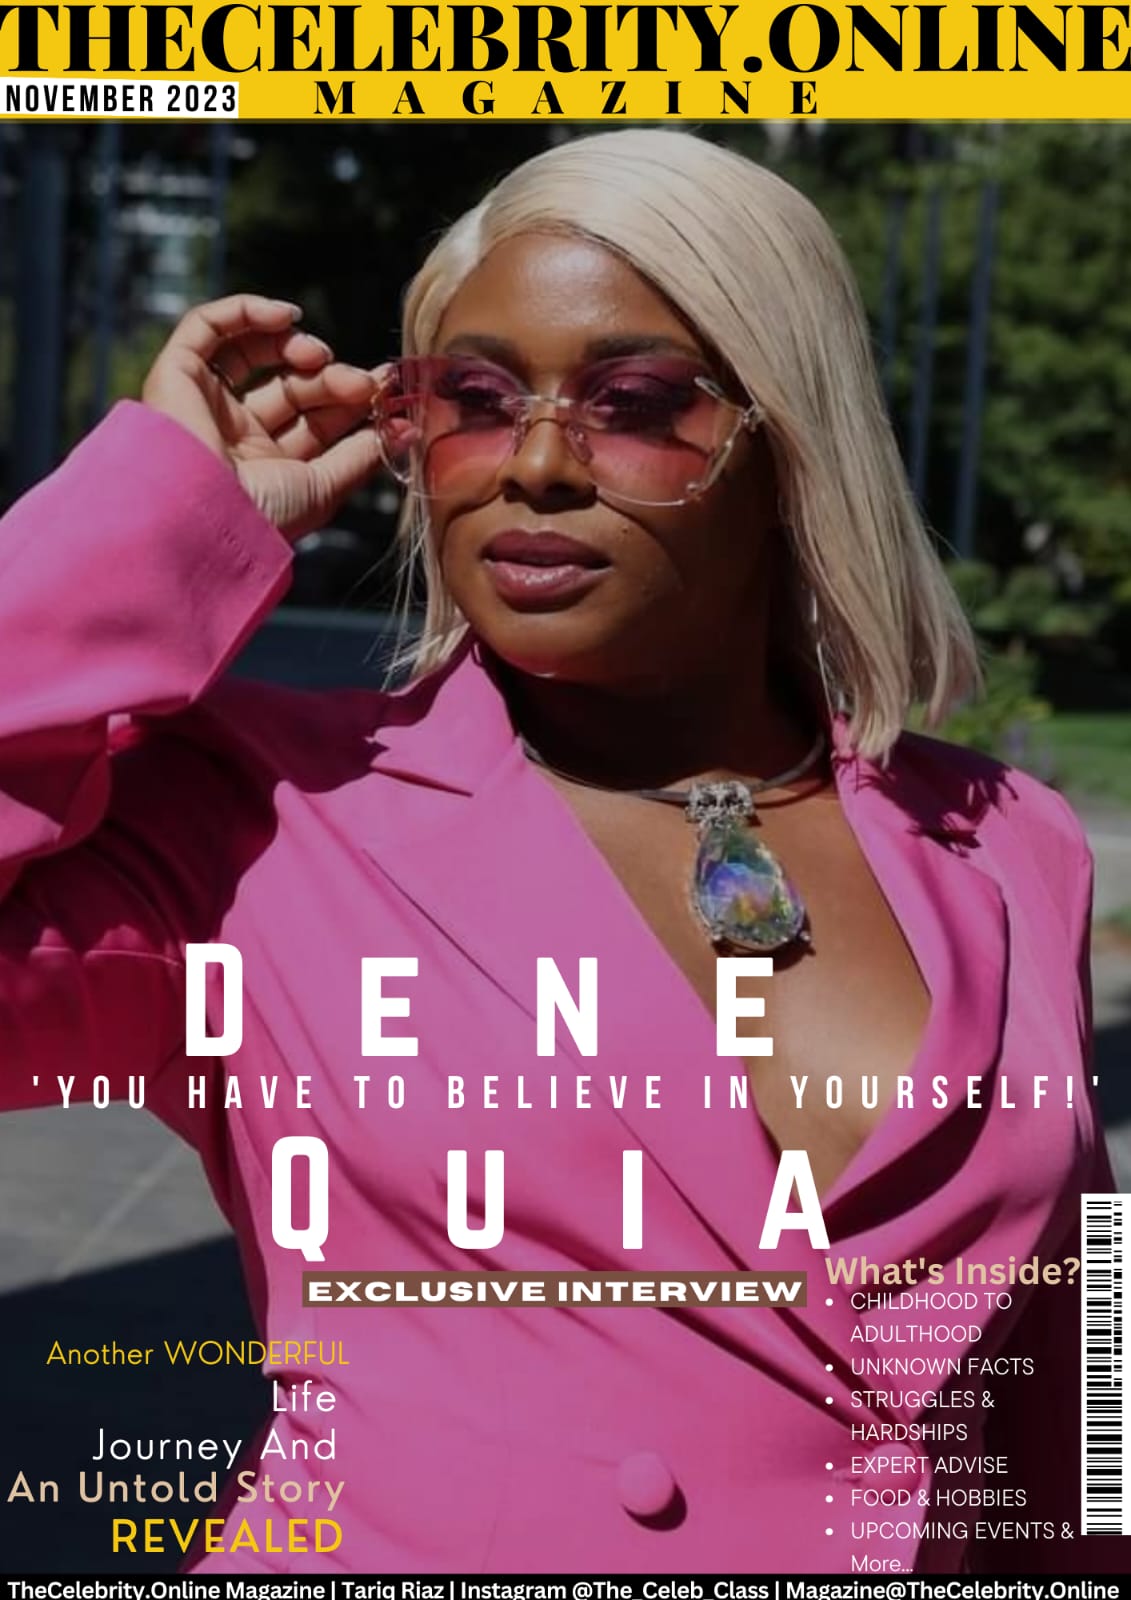 Dene Quia Exclusive Interview – ‘You Have To Believe In Yourself!’